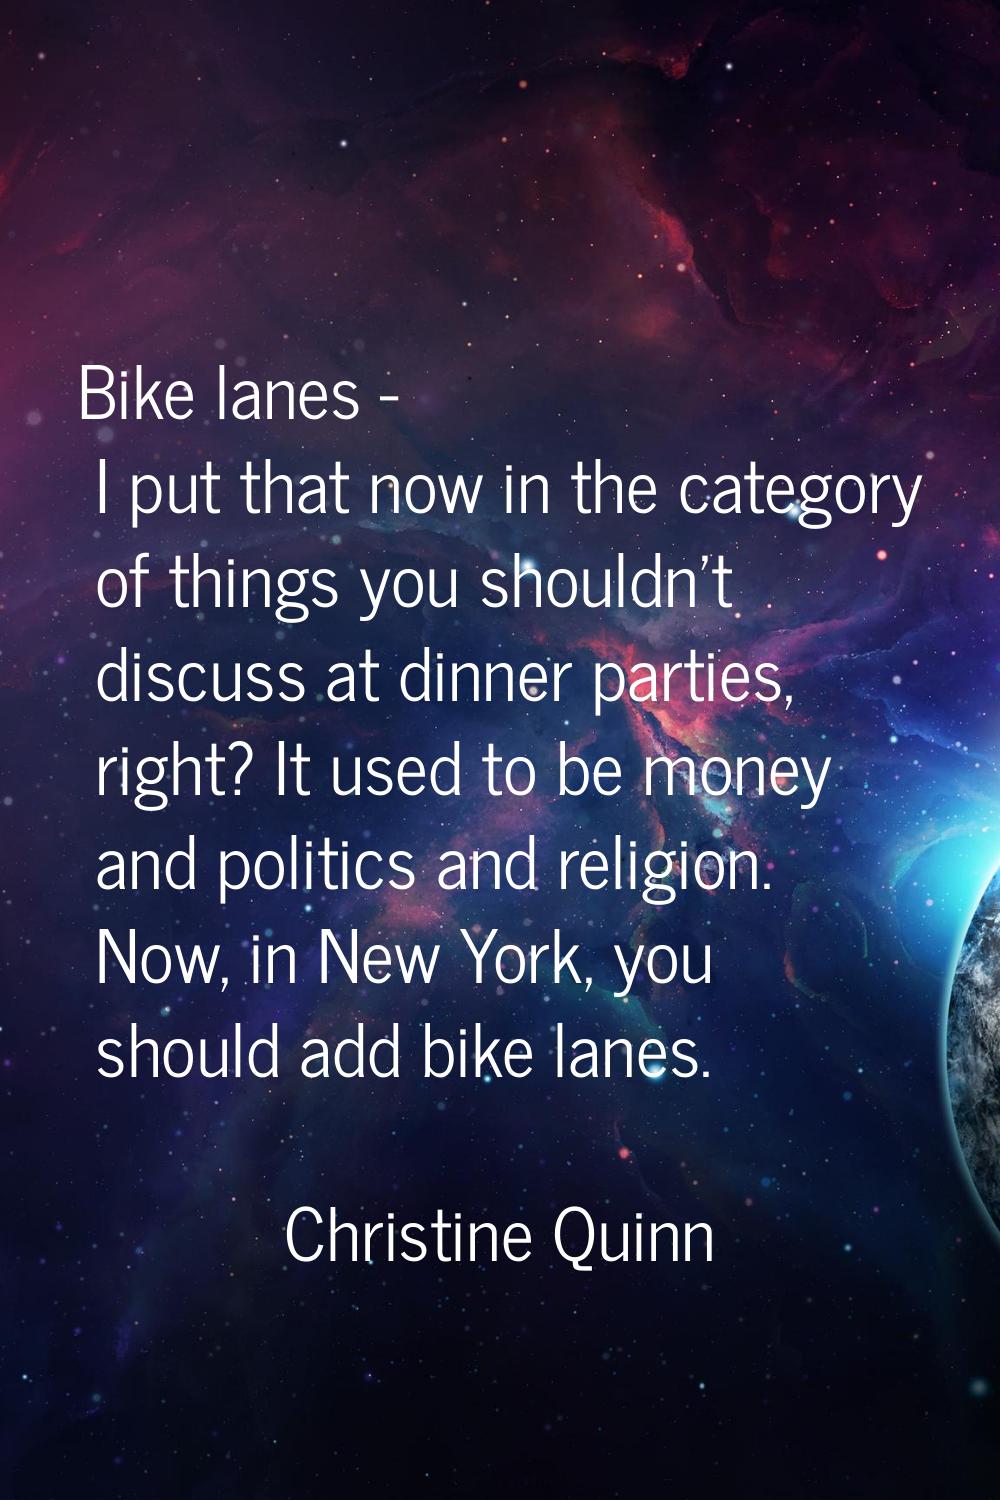 Bike lanes - I put that now in the category of things you shouldn't discuss at dinner parties, righ